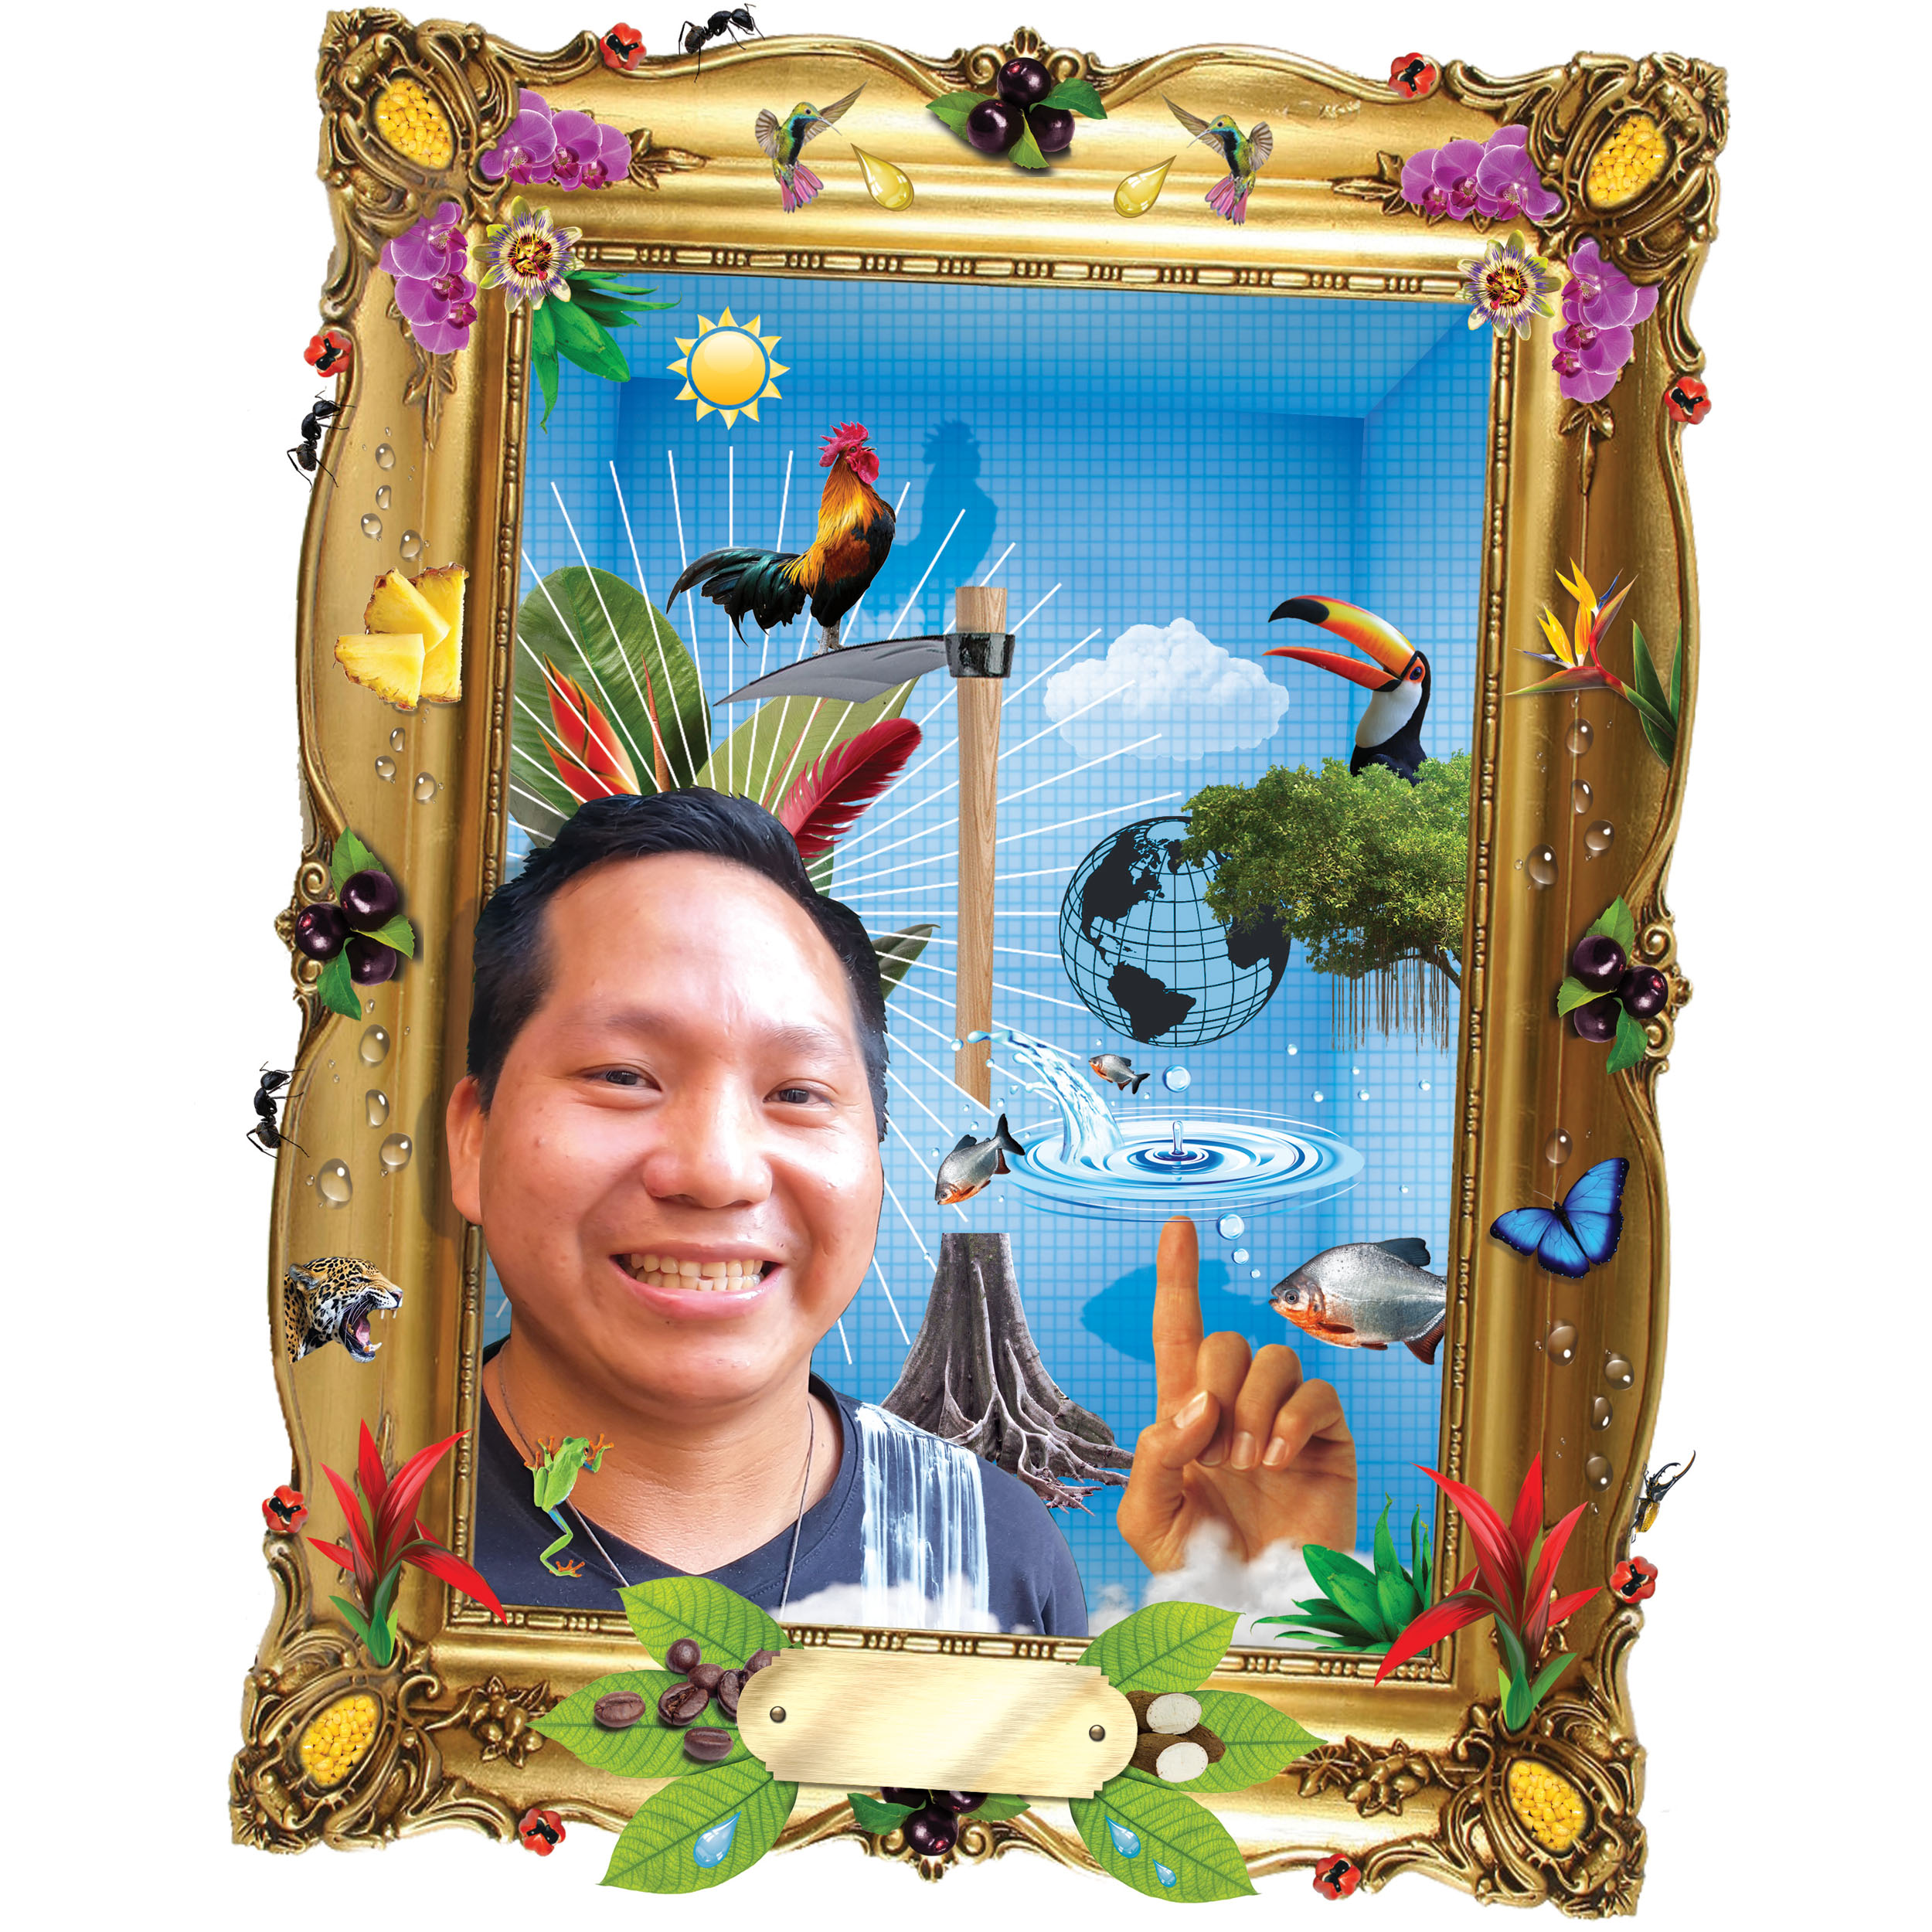 Collage Montage Illustration of a enviromental expert aid charity worker for CAFOD helping in third world communities in Peru, South America.